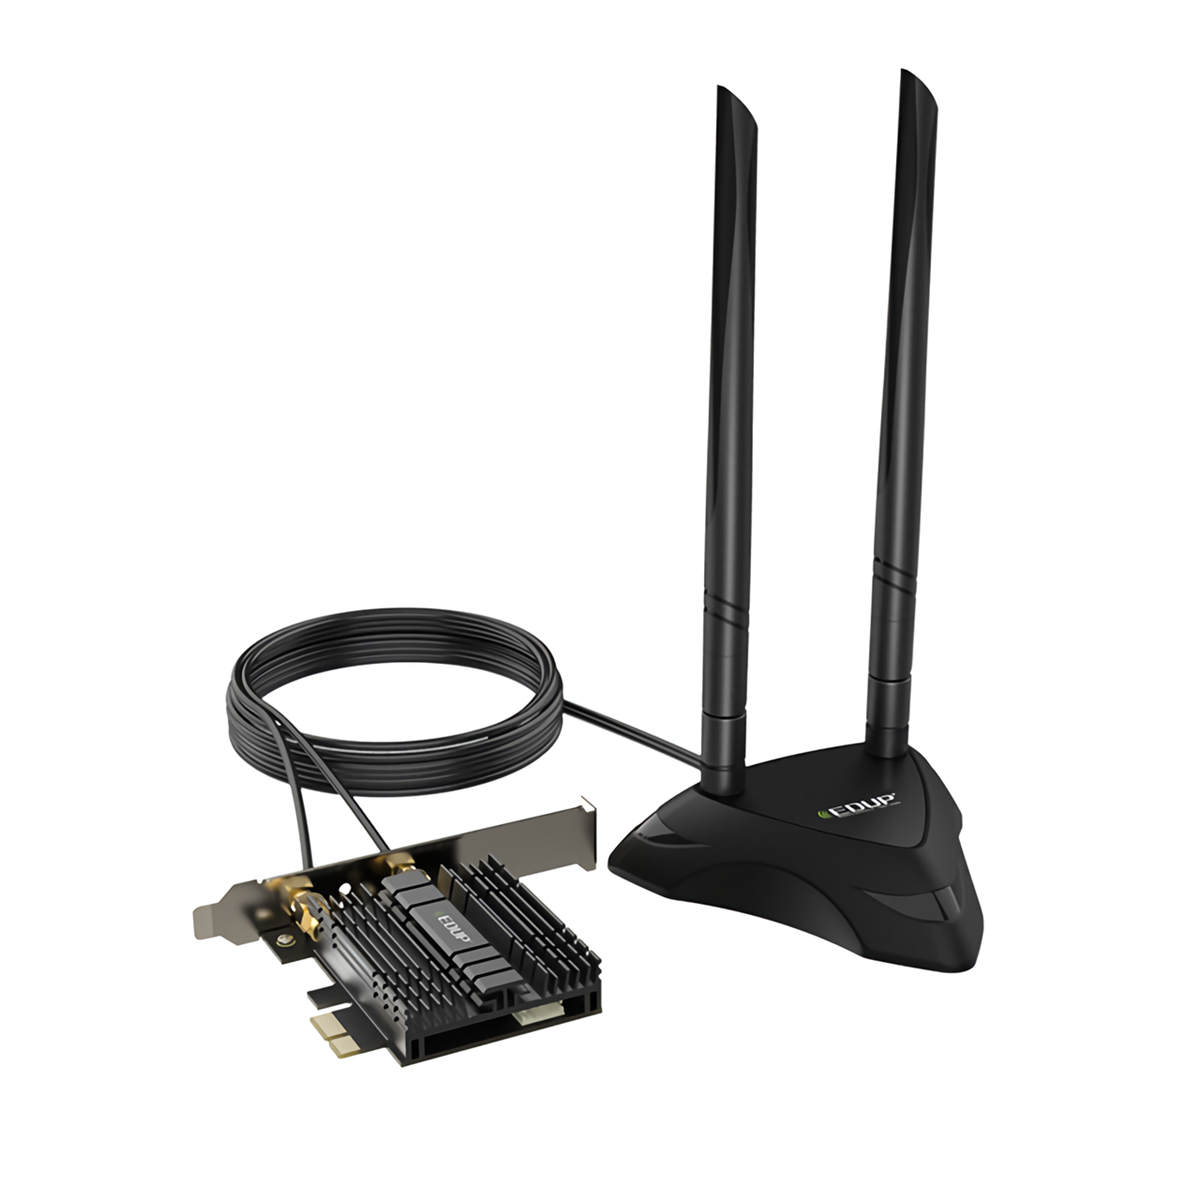 EDUP EP-9636GS PRO PCIe WiFi 6 Card 3000Mbps 802.11AX Dual Band Wireless bluetooth 5.1 Adapter with Magnetic Antenna Base MU-MIMO OFDMA Advanced Heat Sink for Desktop PC Windows 10 64bit